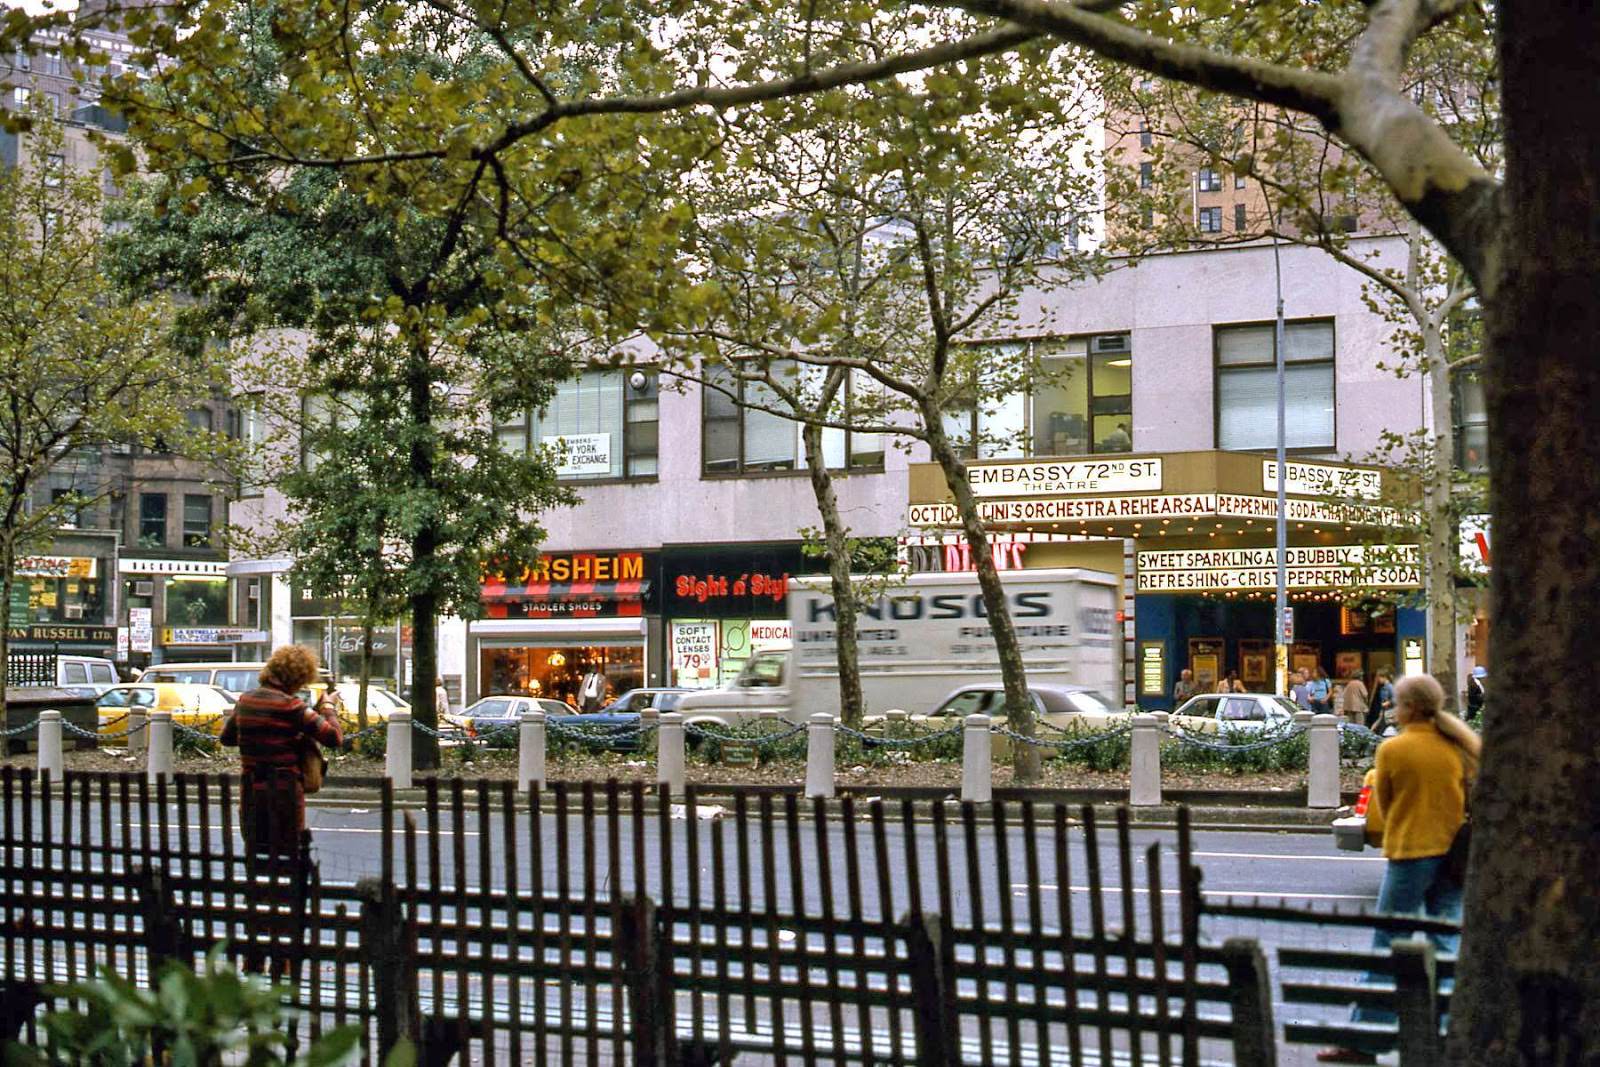 72nd and Broadway, facing West, mid ’70s